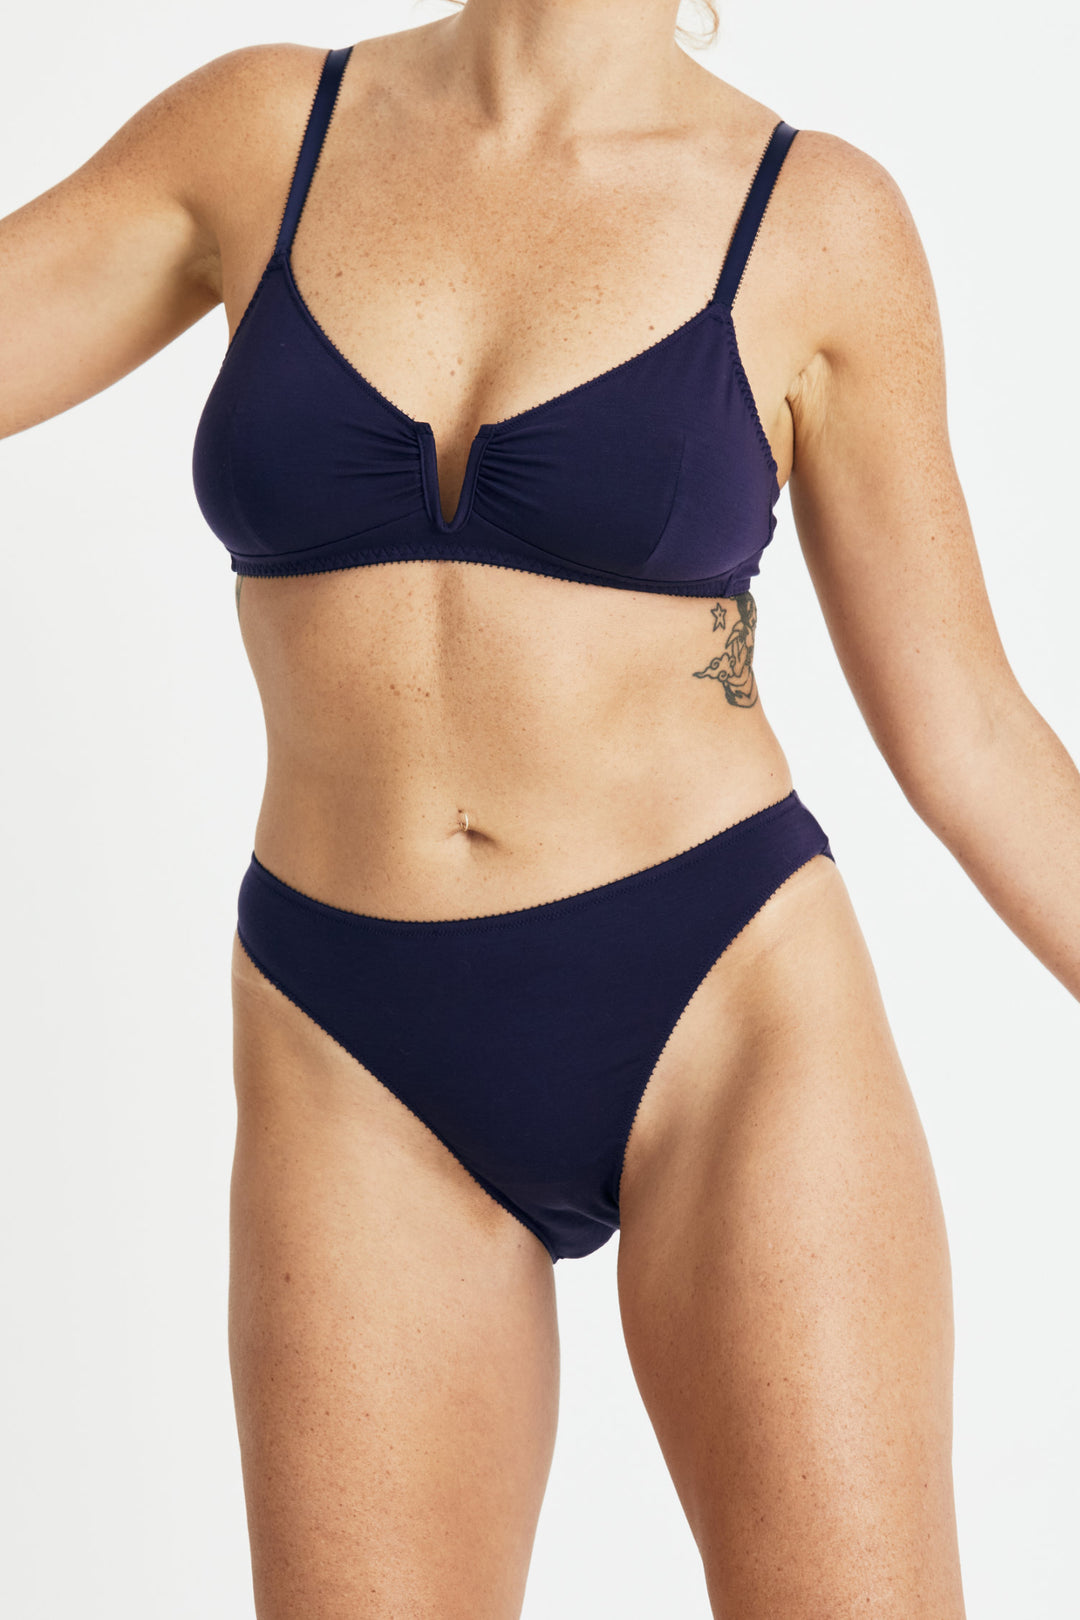 Videris Lingerie bikini knicker in indigo TENCEL™  mid-rise style cut to follow the natural curve of your hips and elongate the legs